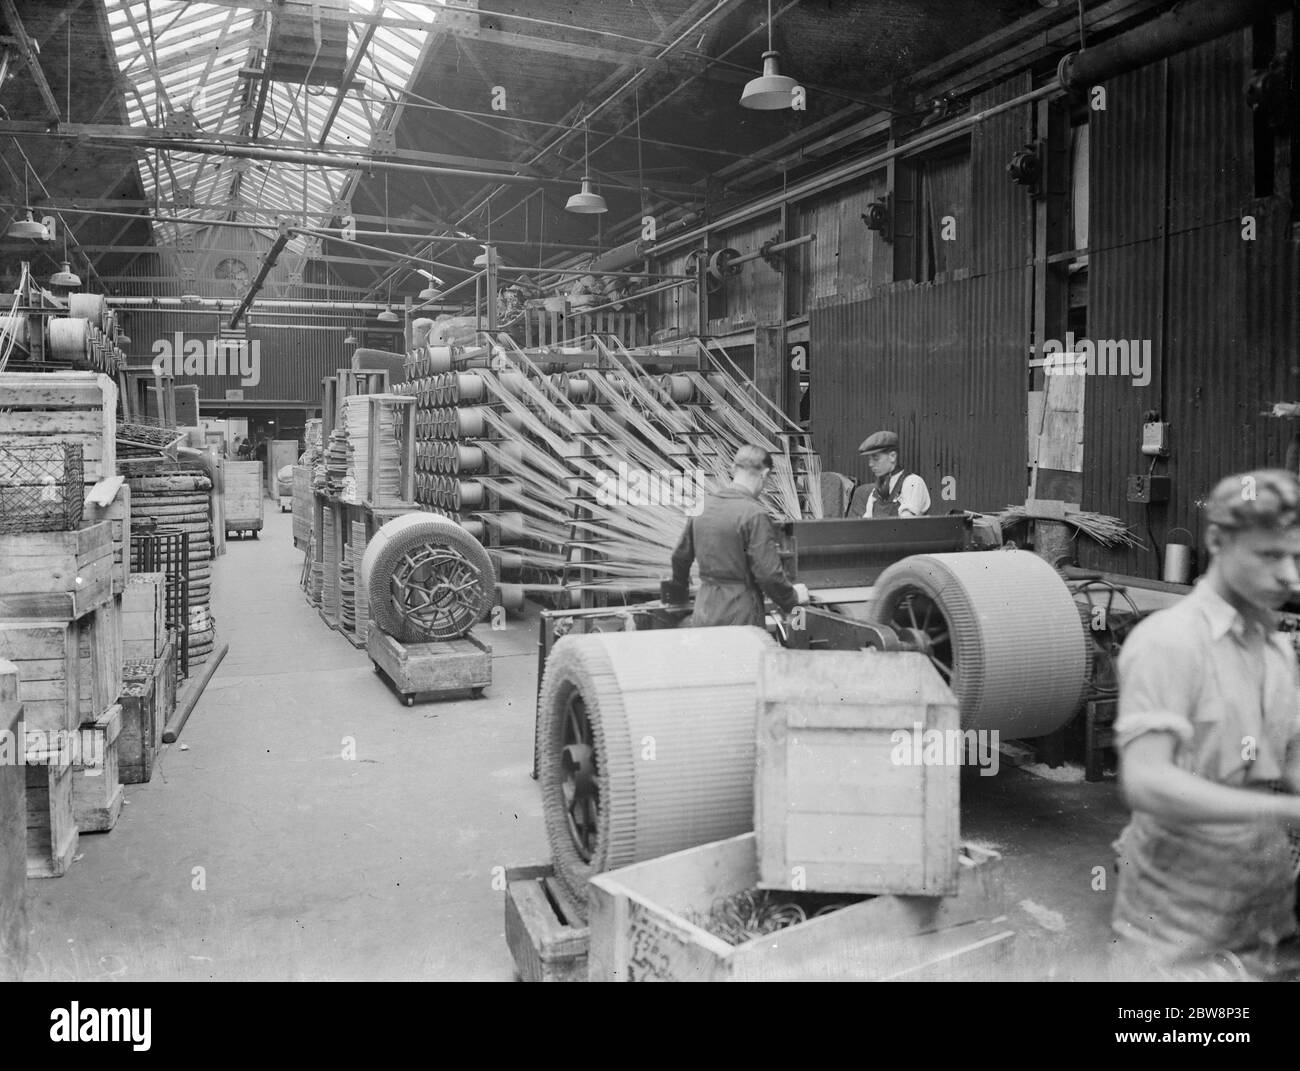 The Lloyd Loom loom that could weave twisted craft paper into a woven fabric, partly reinforced with steel wire. The loom in action in the foreground can be seen giant rolls of woven fibre, fresh from the loom, waiting to be taken to the cutting room. 1938 Stock Photo